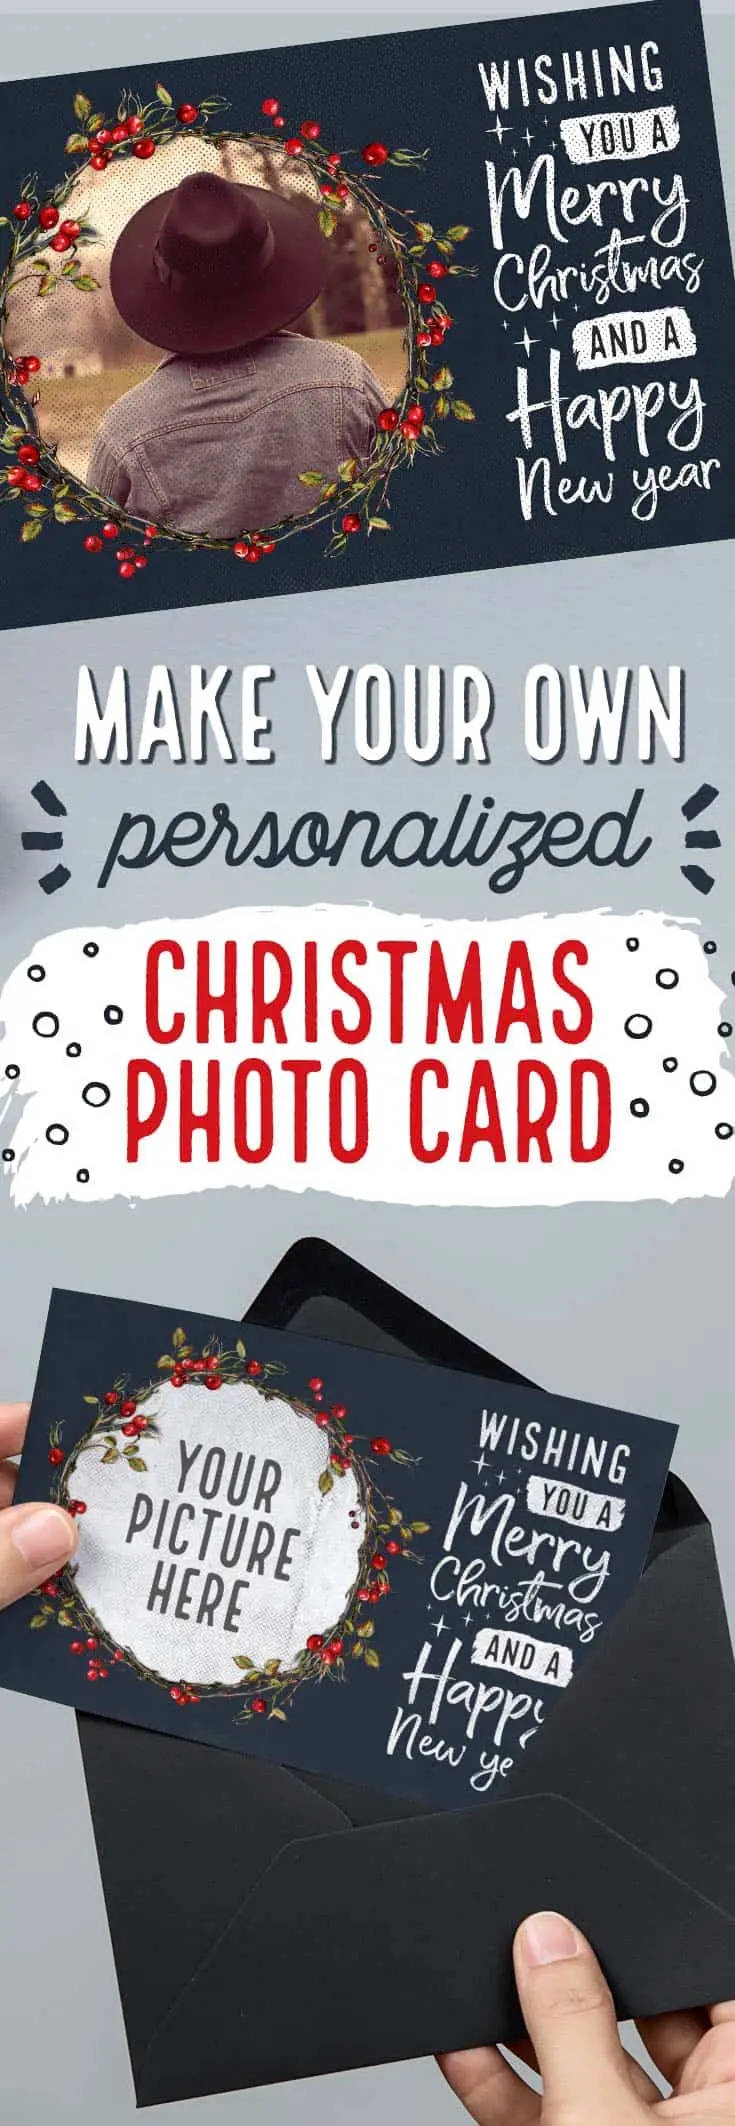 Design my own christmas card with photo